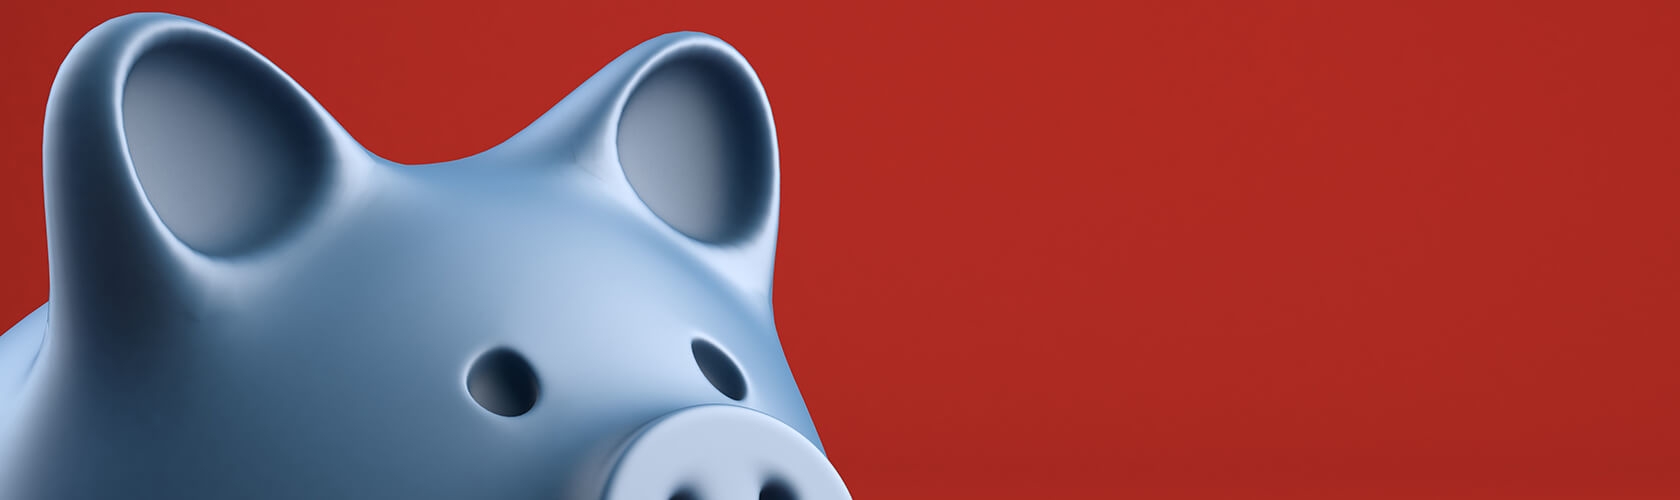 A piggy bank sits in front of a red background